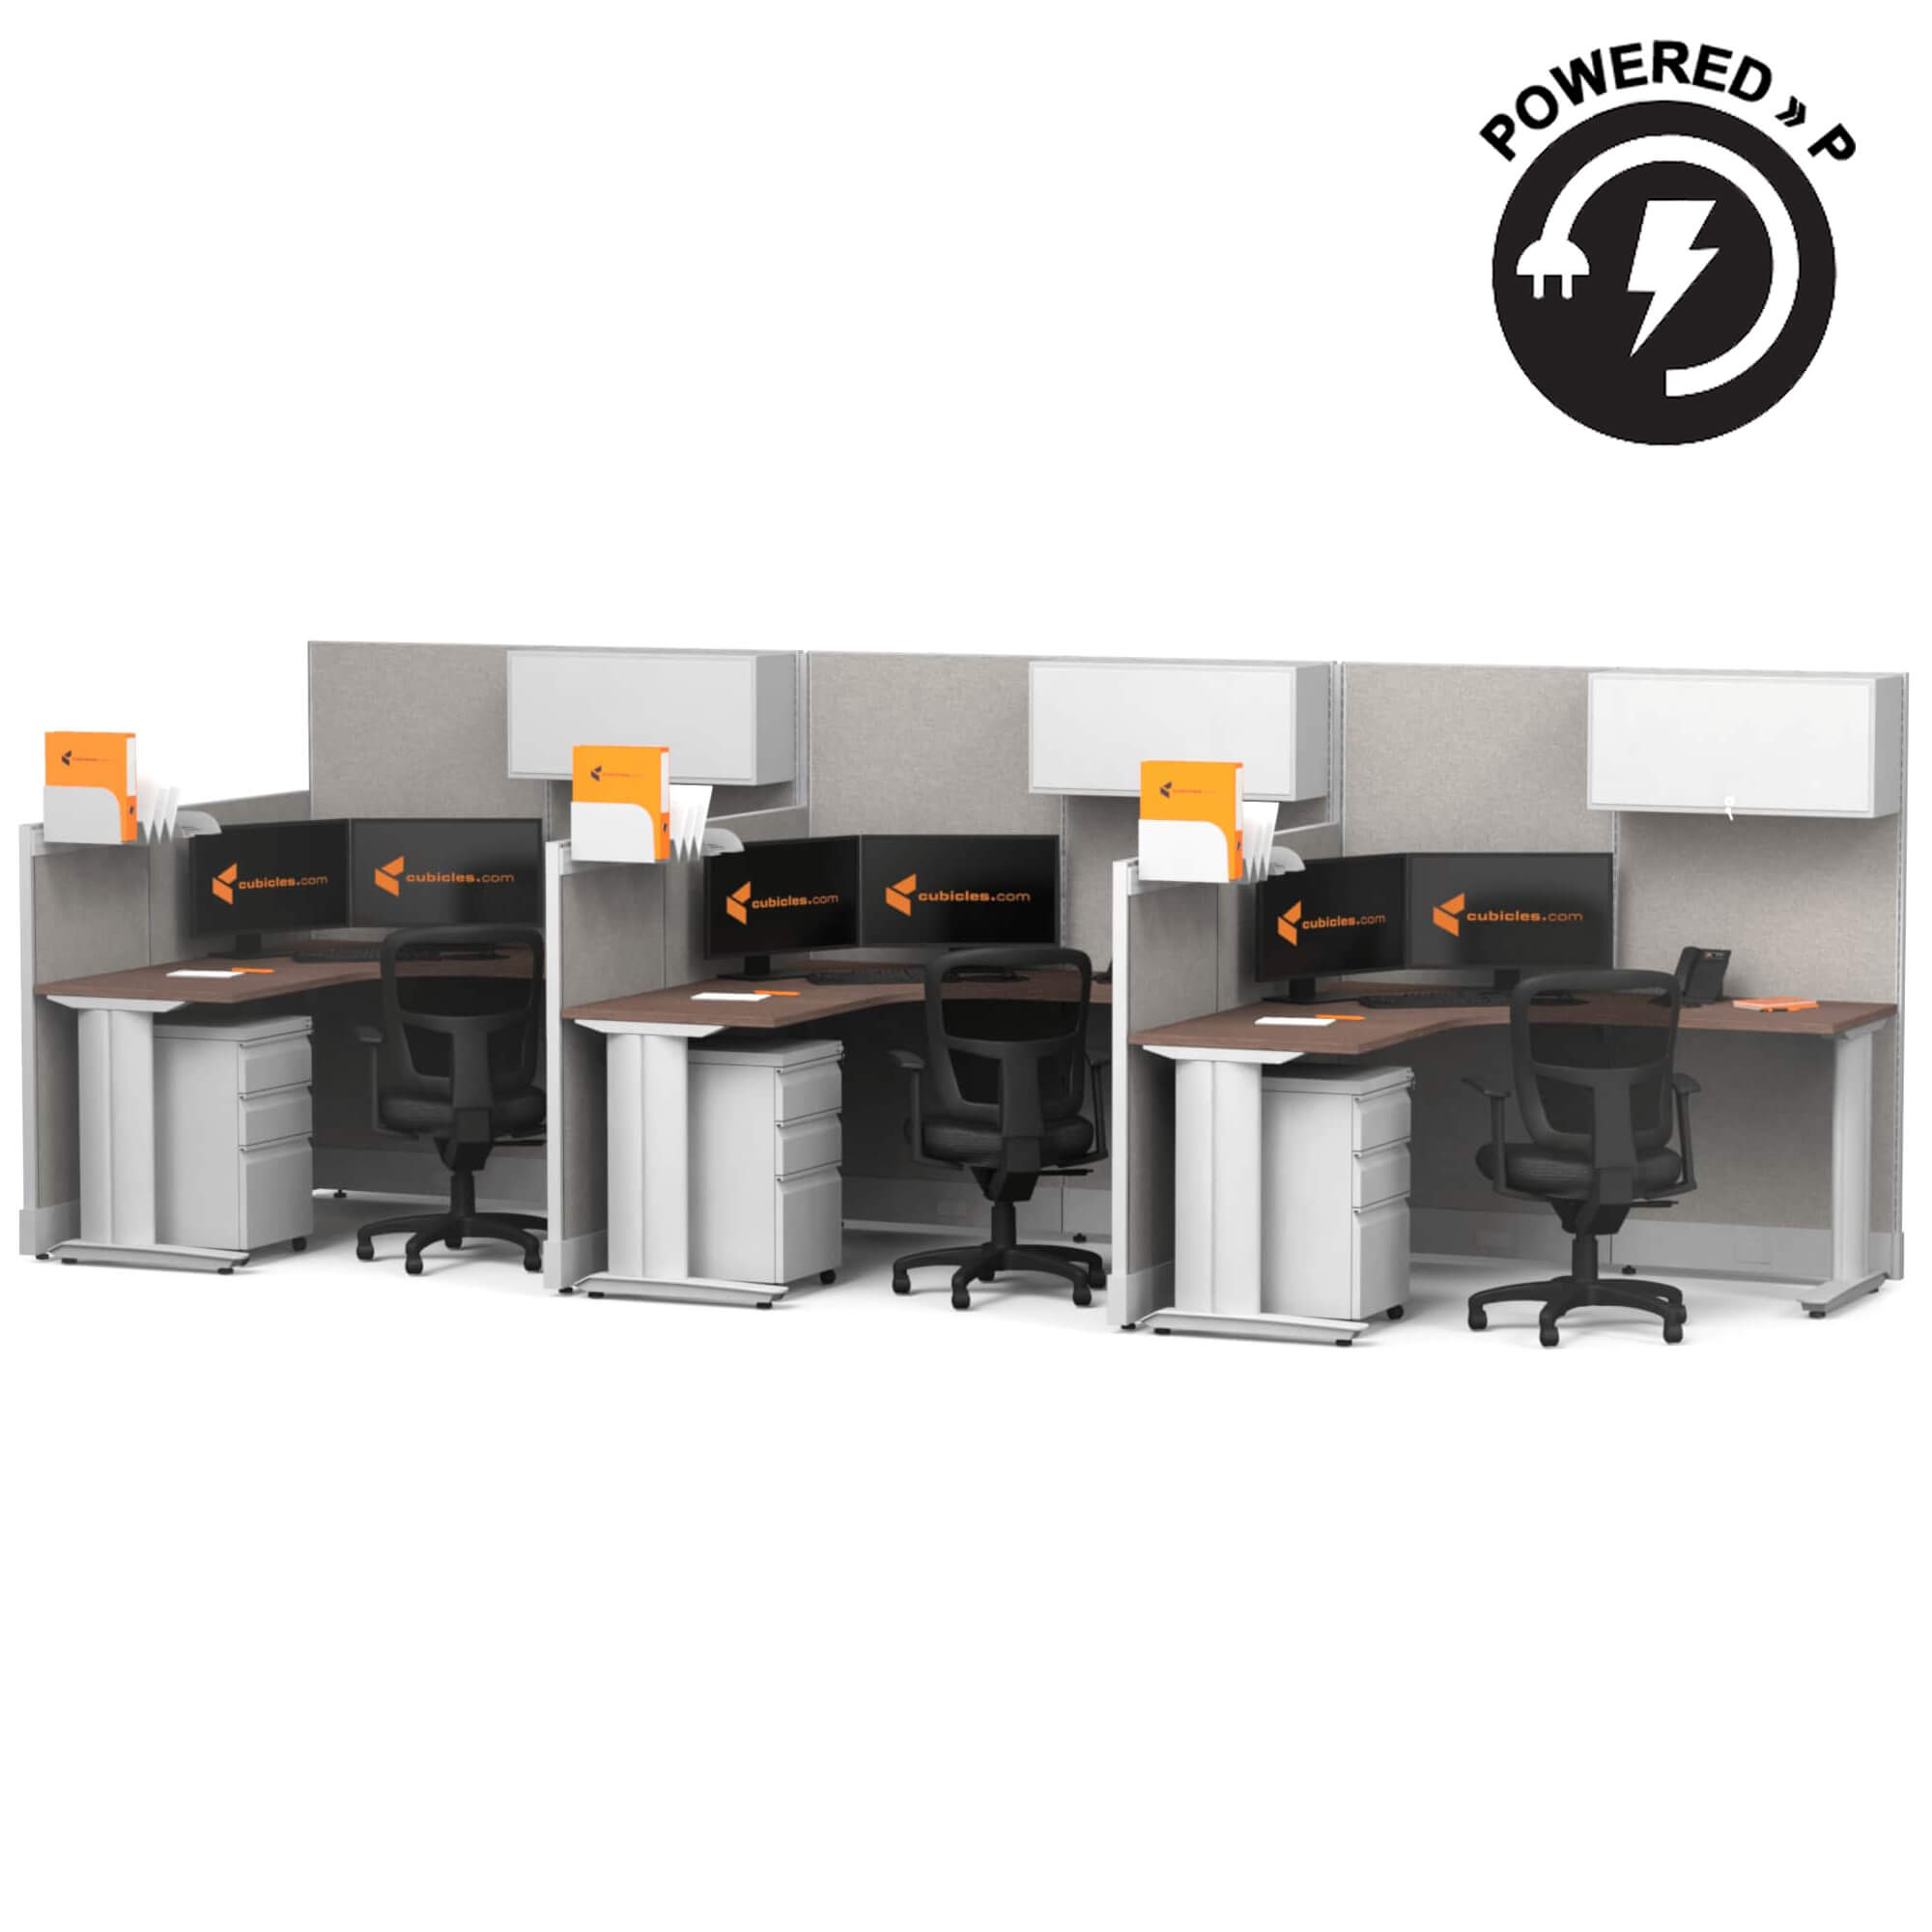 Cubicle desk l shaped with storage 3pack powered